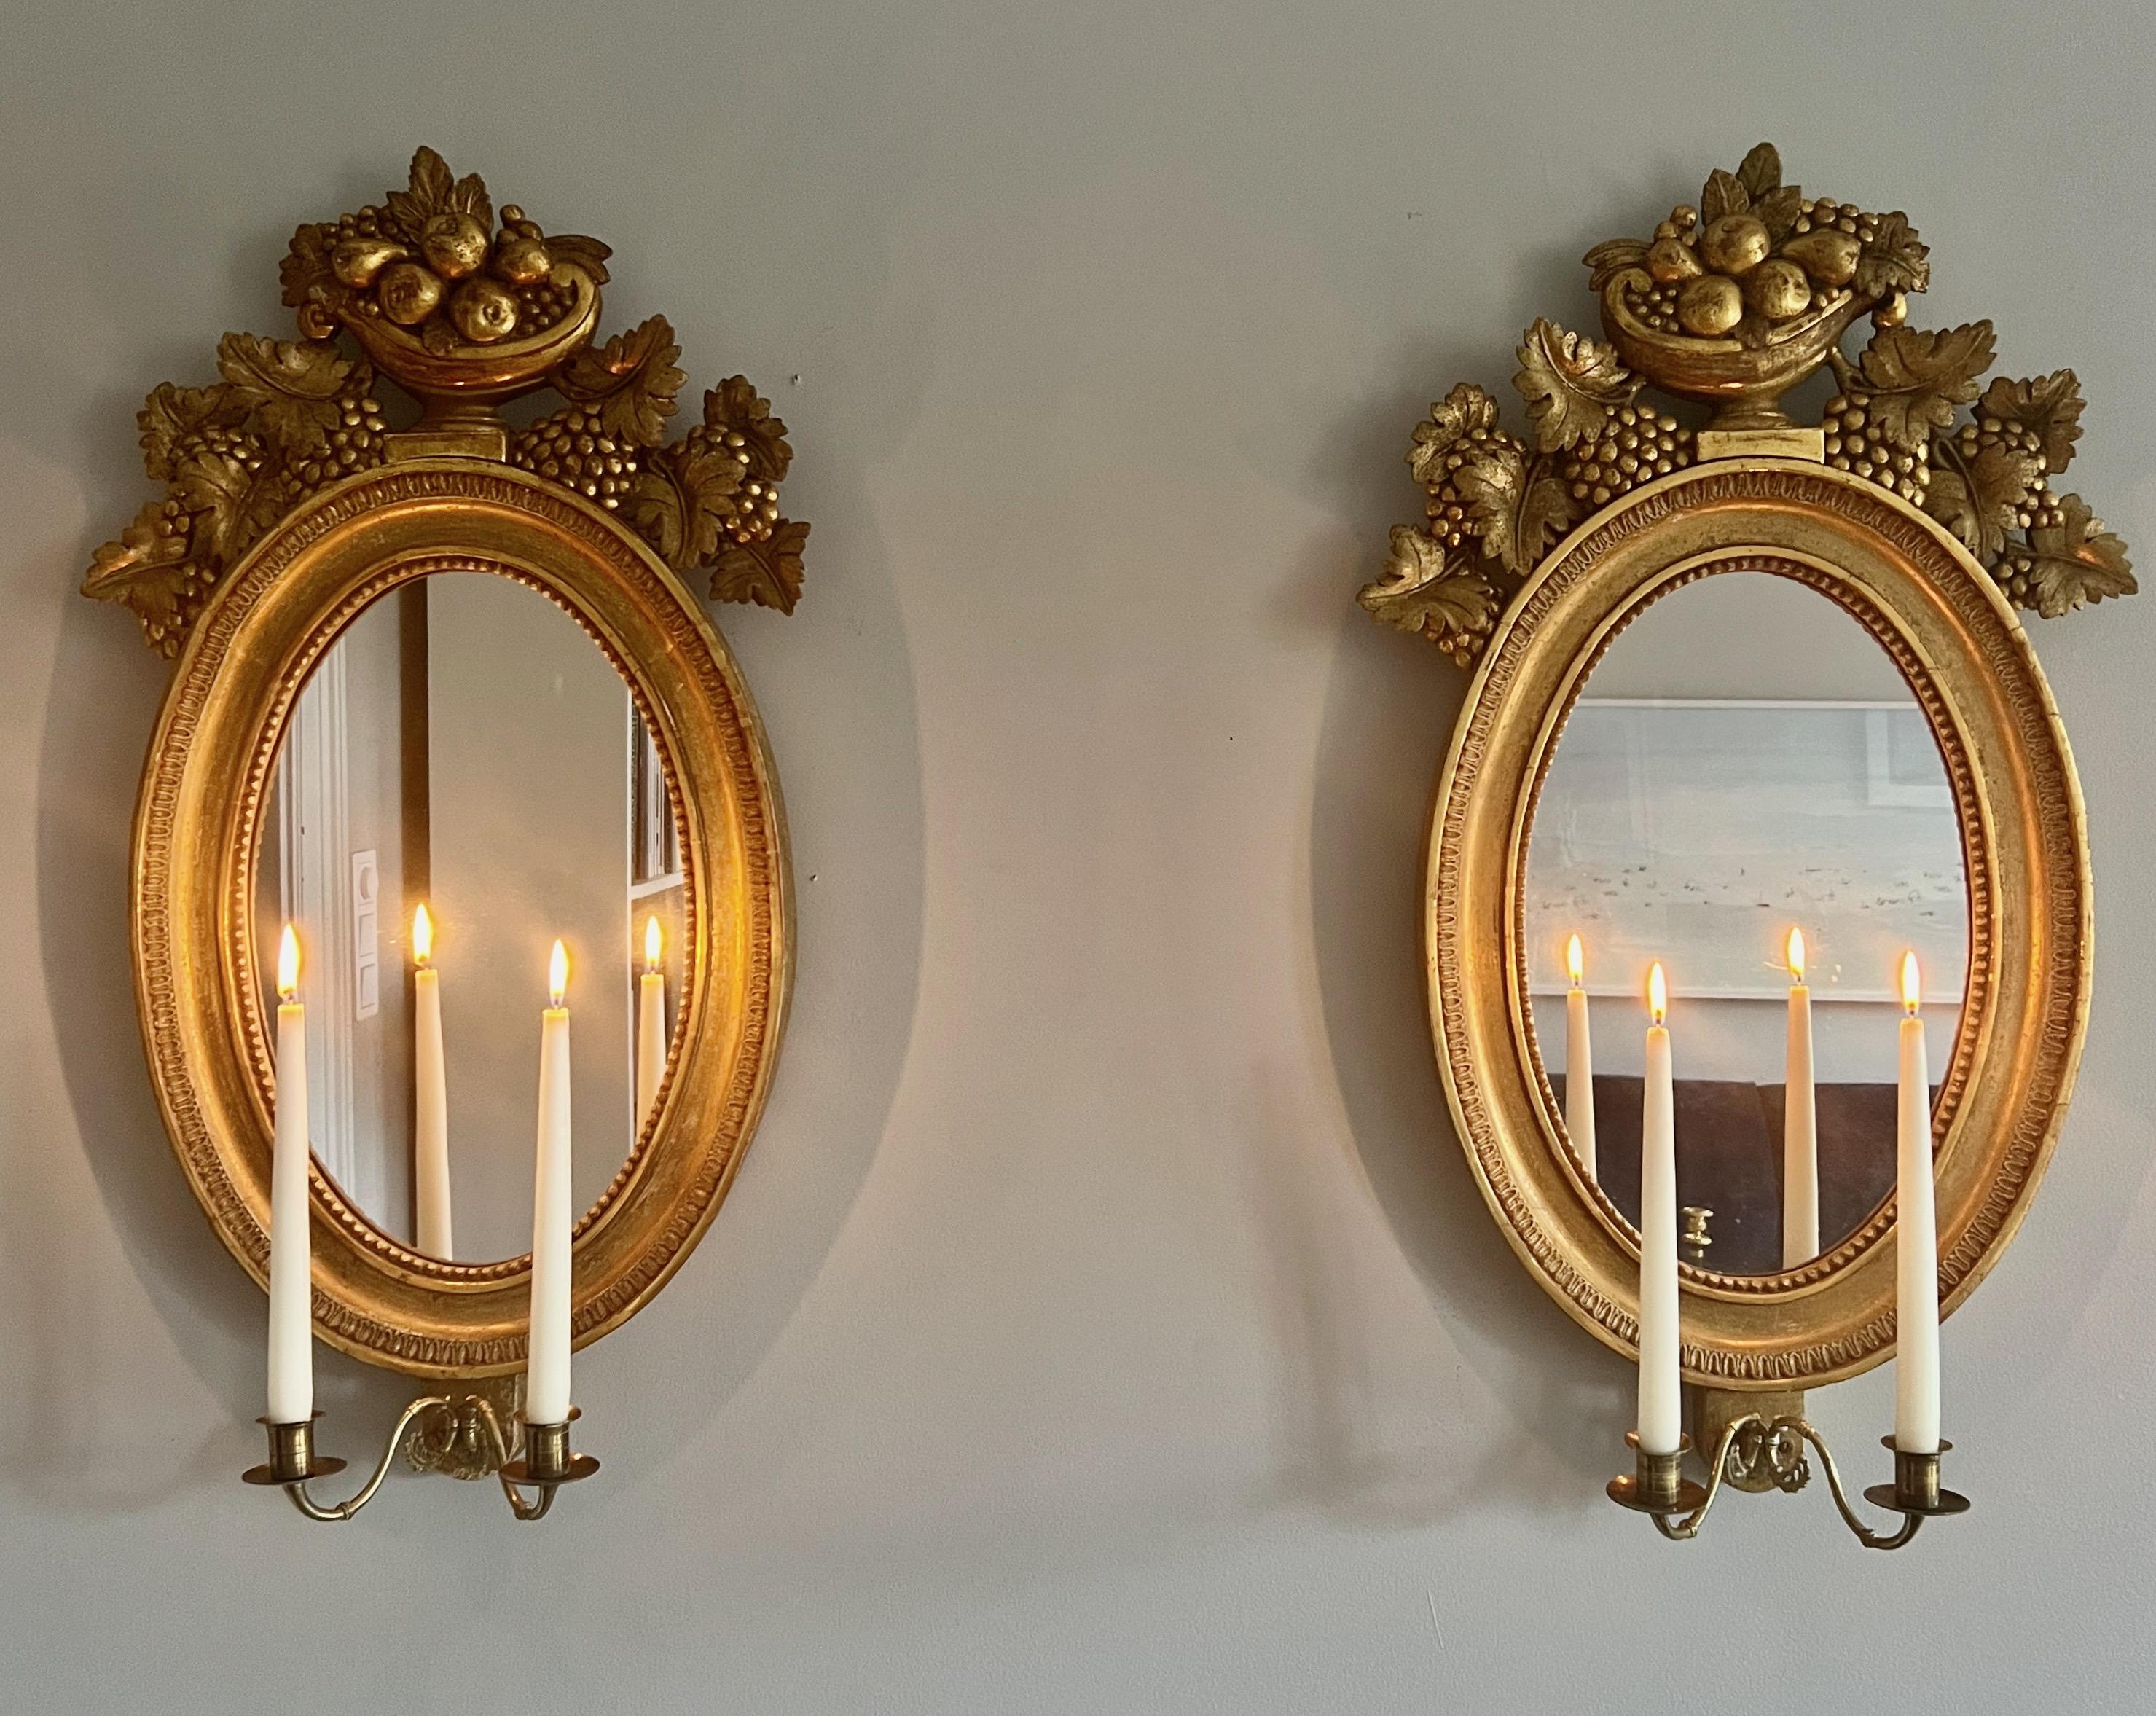 A very fine pair of 19th century Swedish girandole mirrors in carved giltwood by Petter Gustaf Bylander (1777-1859), Gothenburg, Sweden. They have their original gilding with a beautiful worn surface patina. The bronze candleholders are original